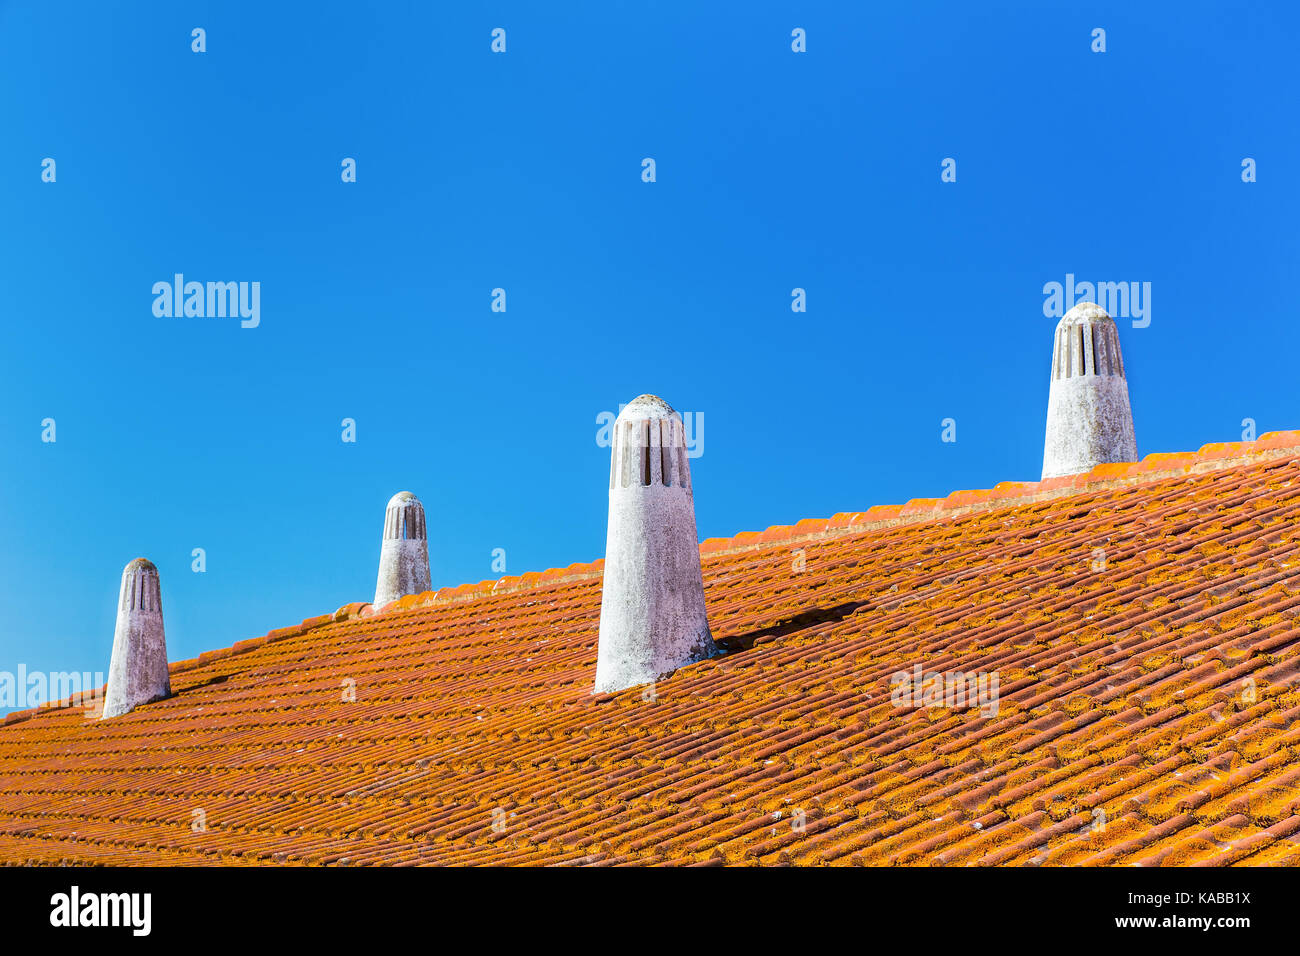 Orange roof tiles with four white chimneys and blue sky Stock Photo